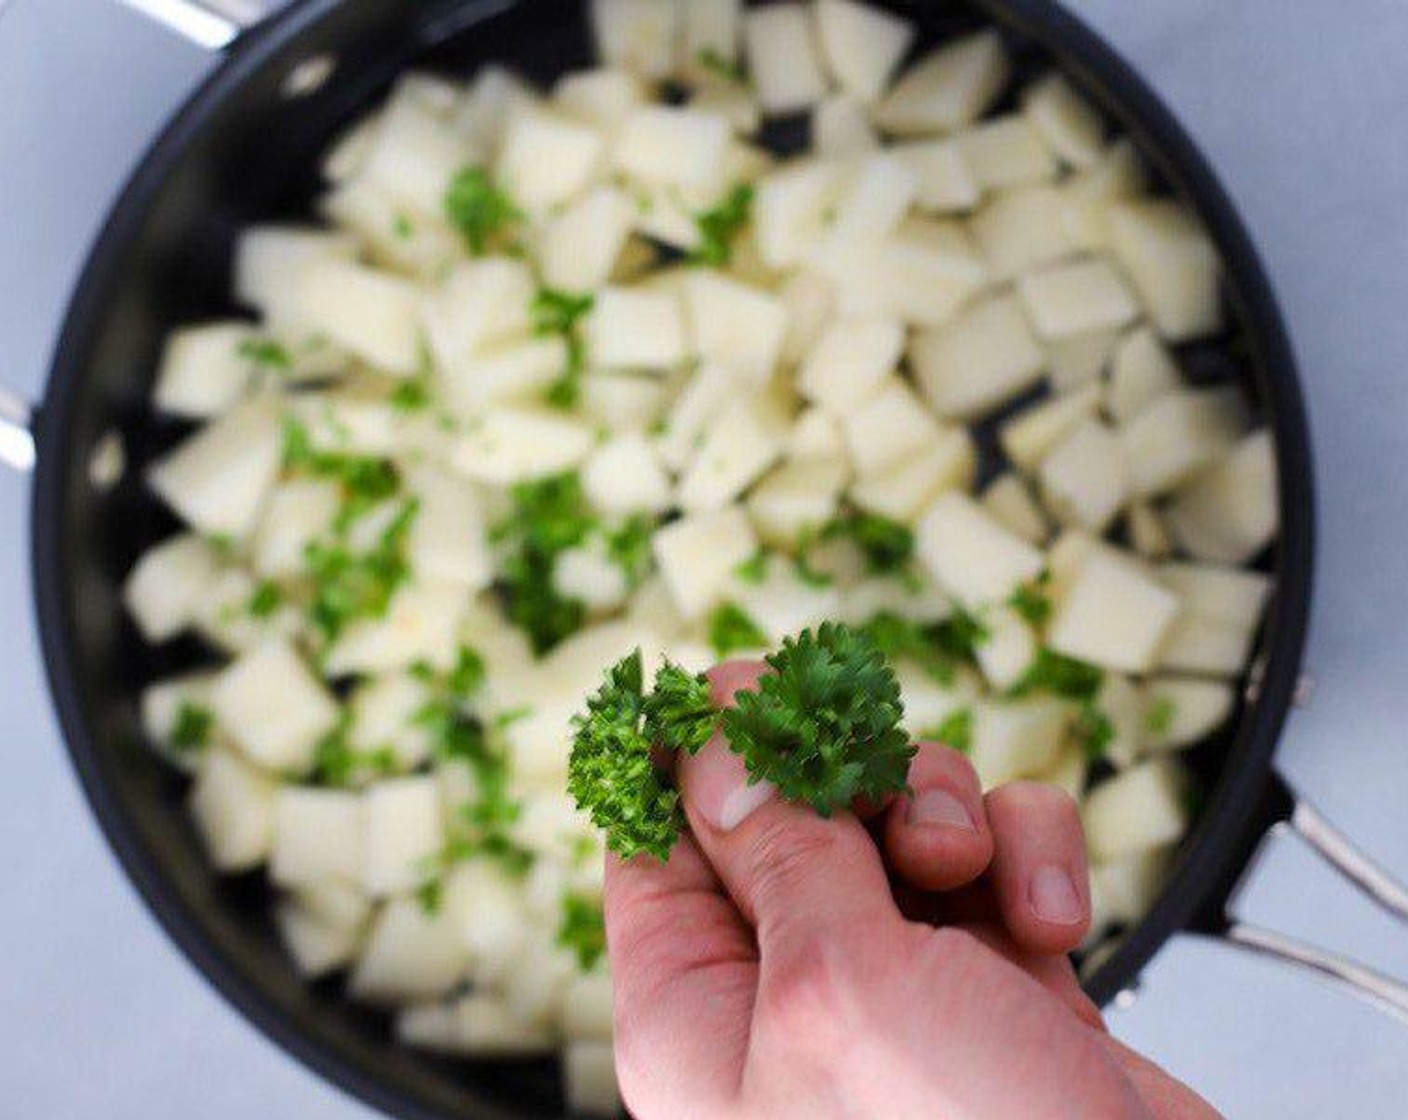 step 1 Place White Potatoes (2) into a 3-4 quart pot with the Water (1 cup). Add the Fresh Parsley (2 Tbsp) and Chicken Bouillon Powder (2 Tbsp).